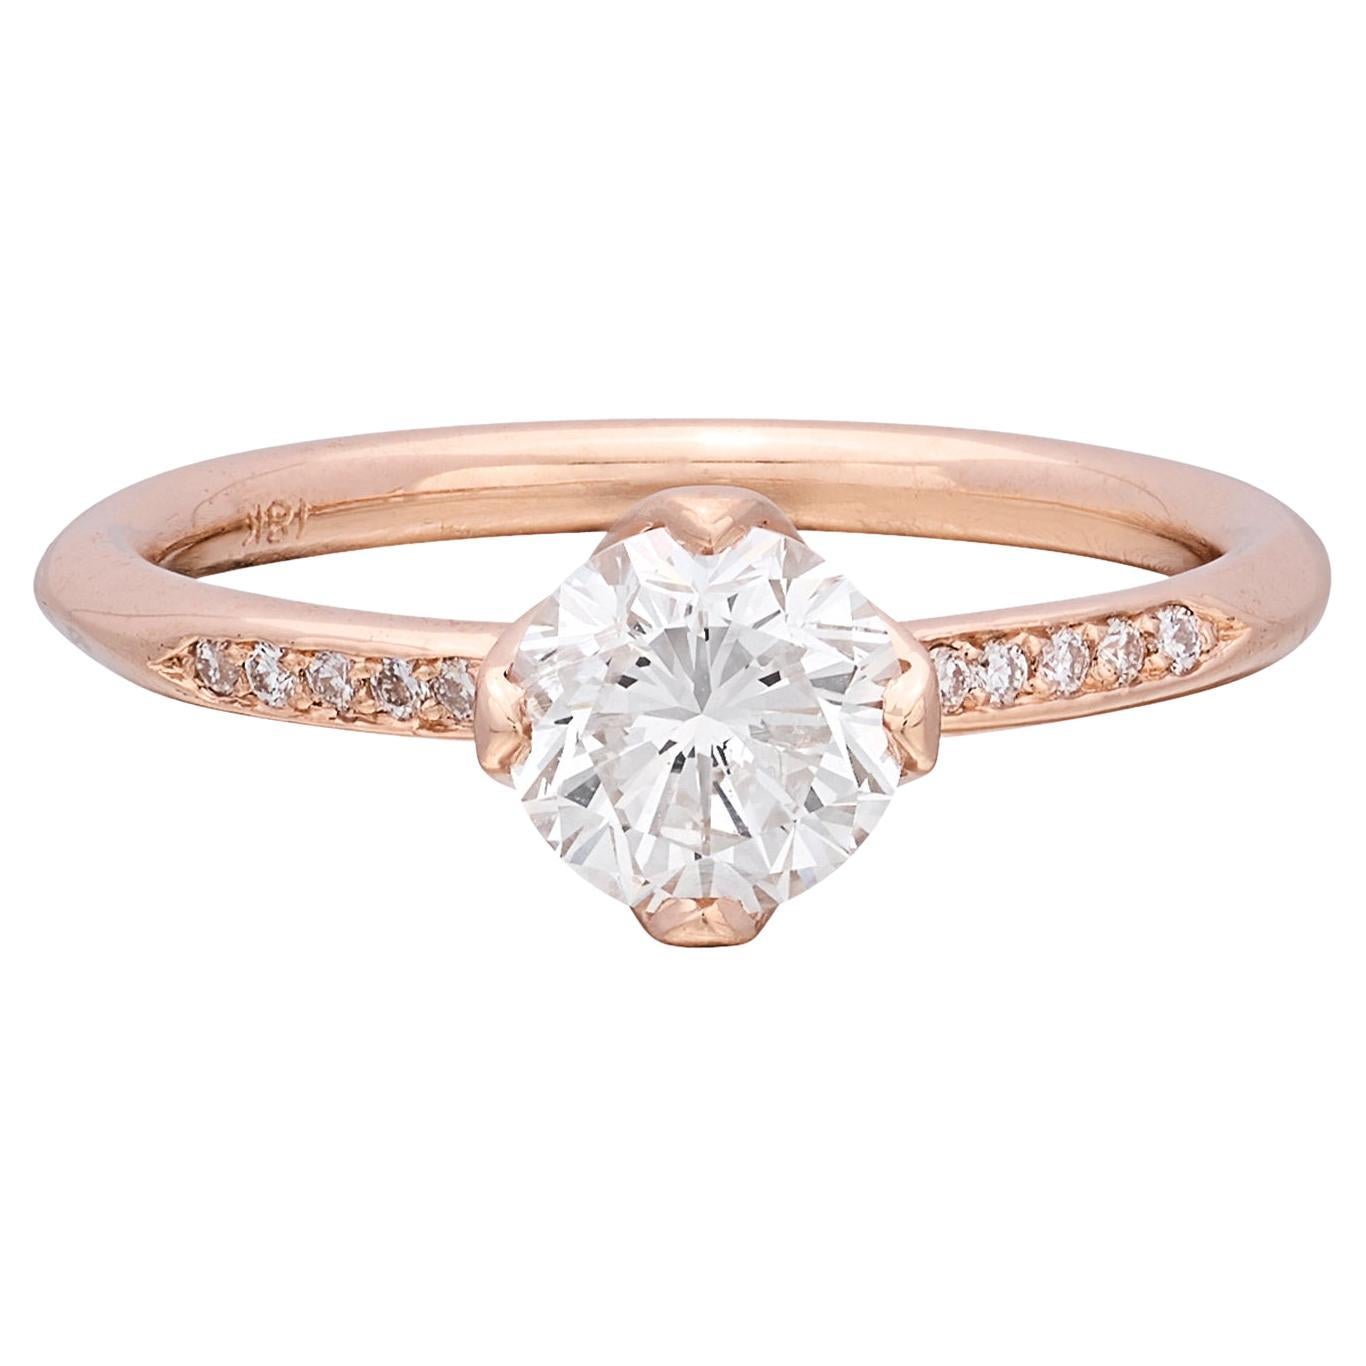 Beautiful 18k Rose Gold Diamond Engagement Ring For Sale